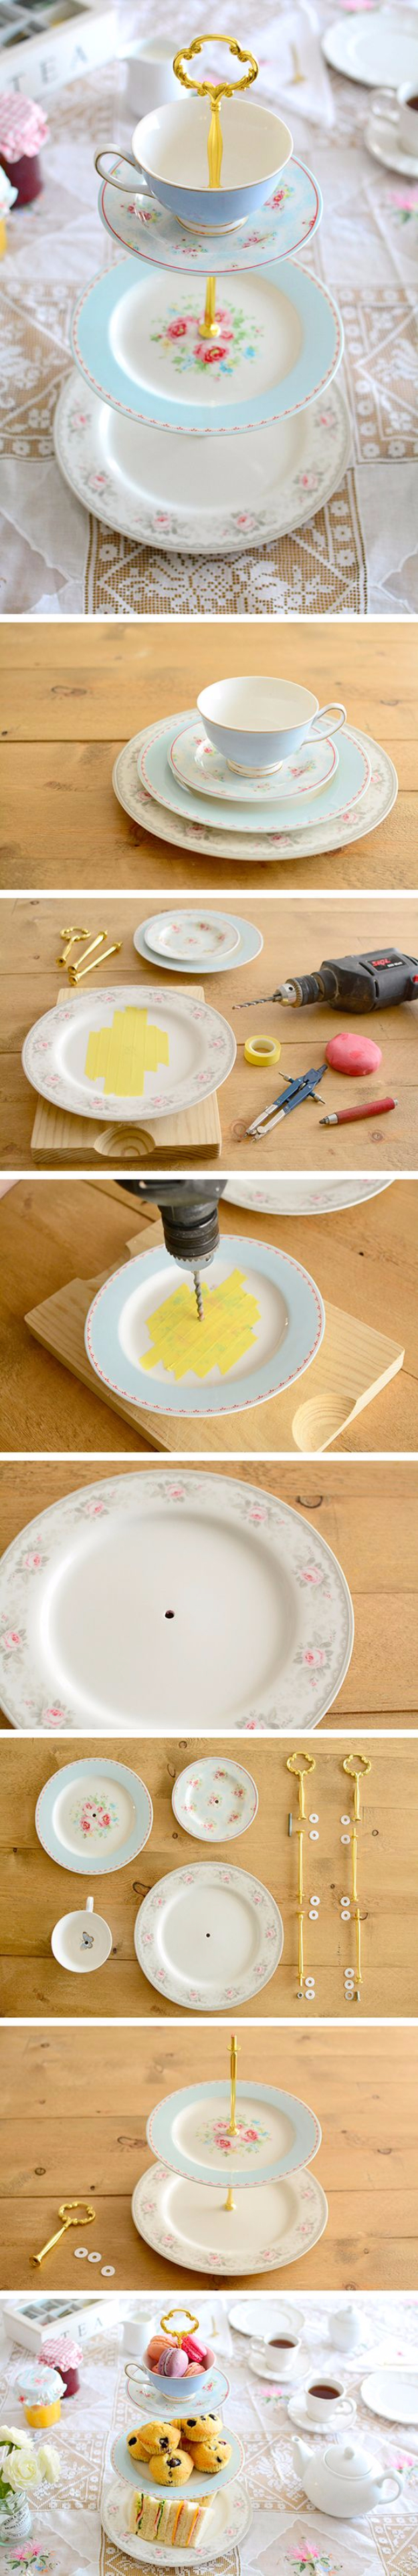 15 Creatively Decorative DIY Ideas That Make Use Of Boring Dishes